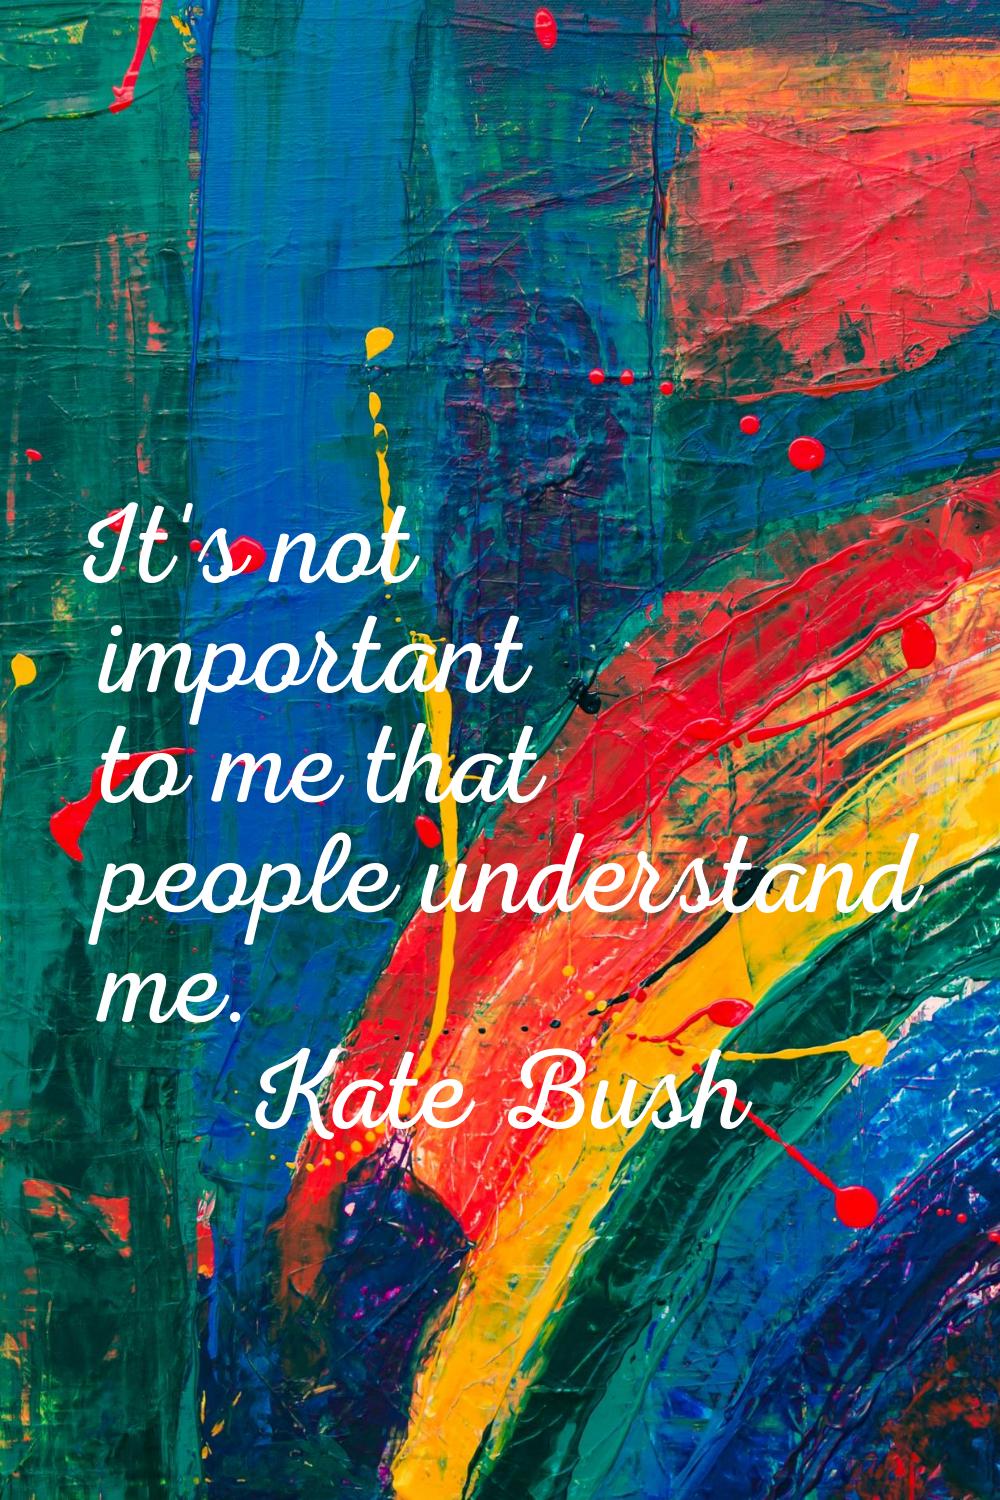 It's not important to me that people understand me.